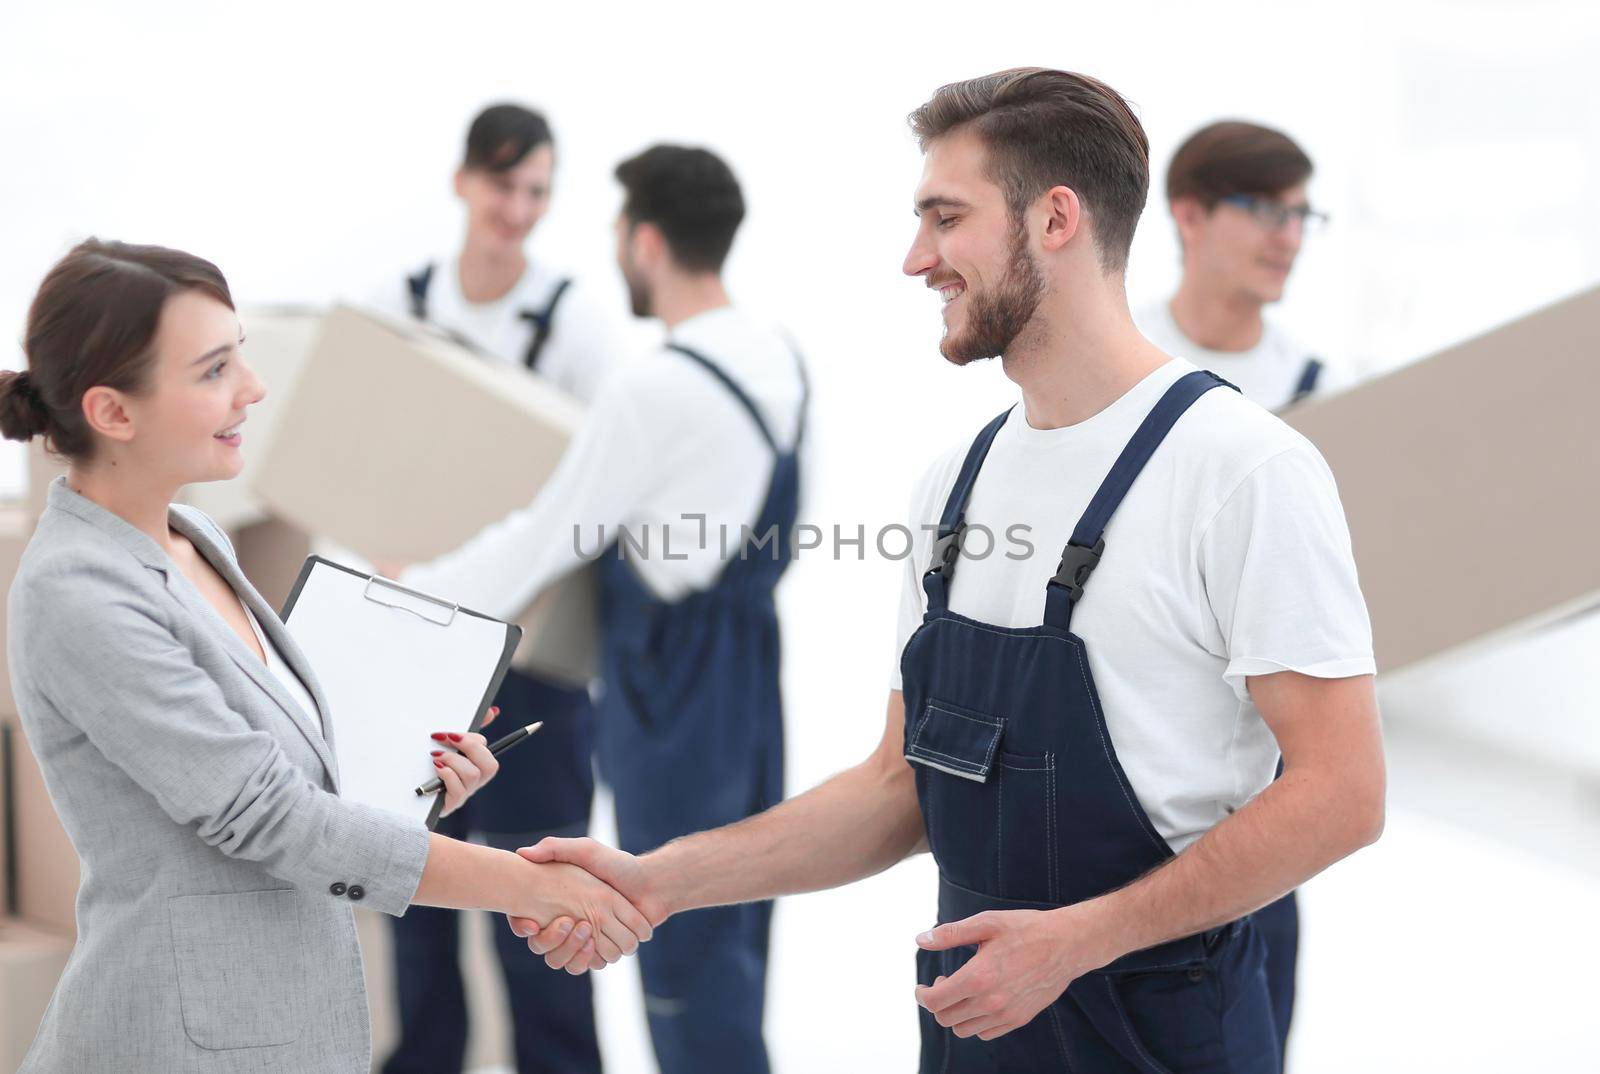 Manager with clipboard shaking hands with movers. by asdf